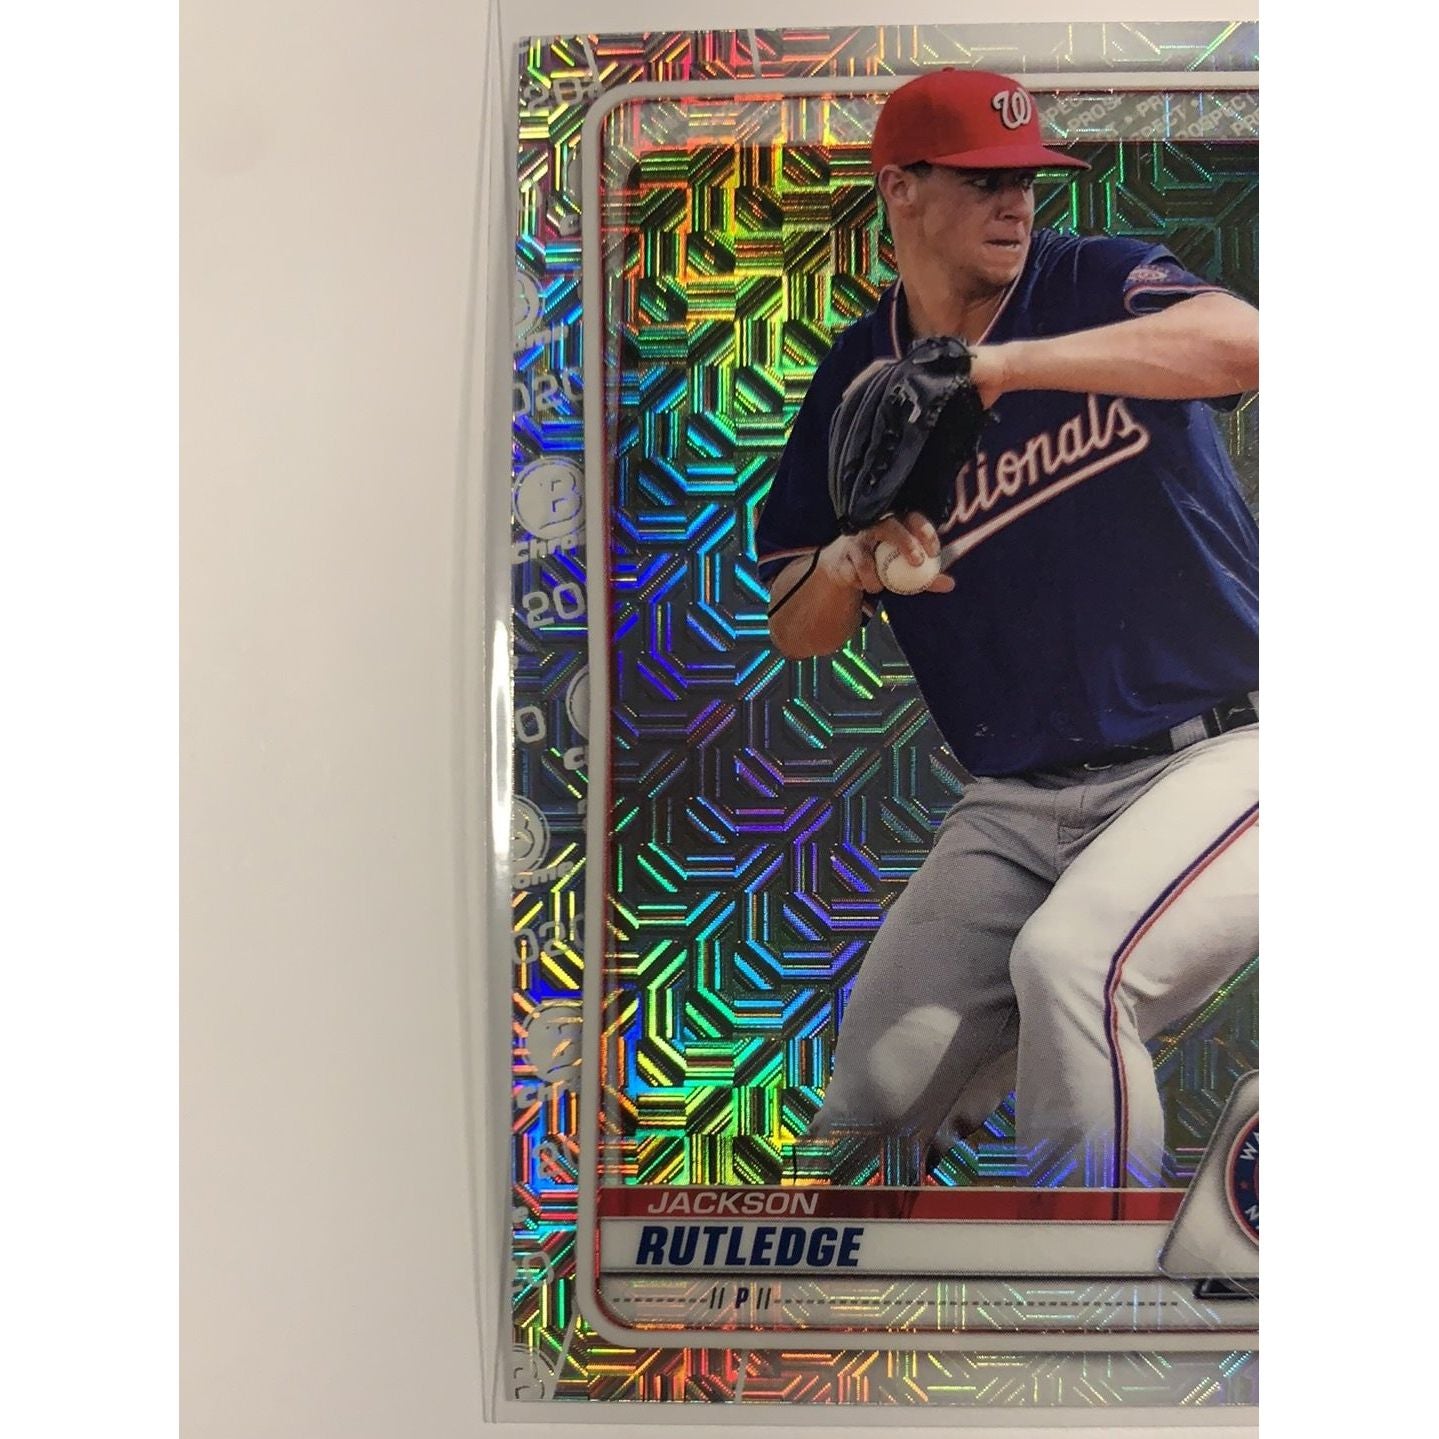  2020 Bowman Chrome Jackson Rutledge Mojo Refractor  Local Legends Cards & Collectibles